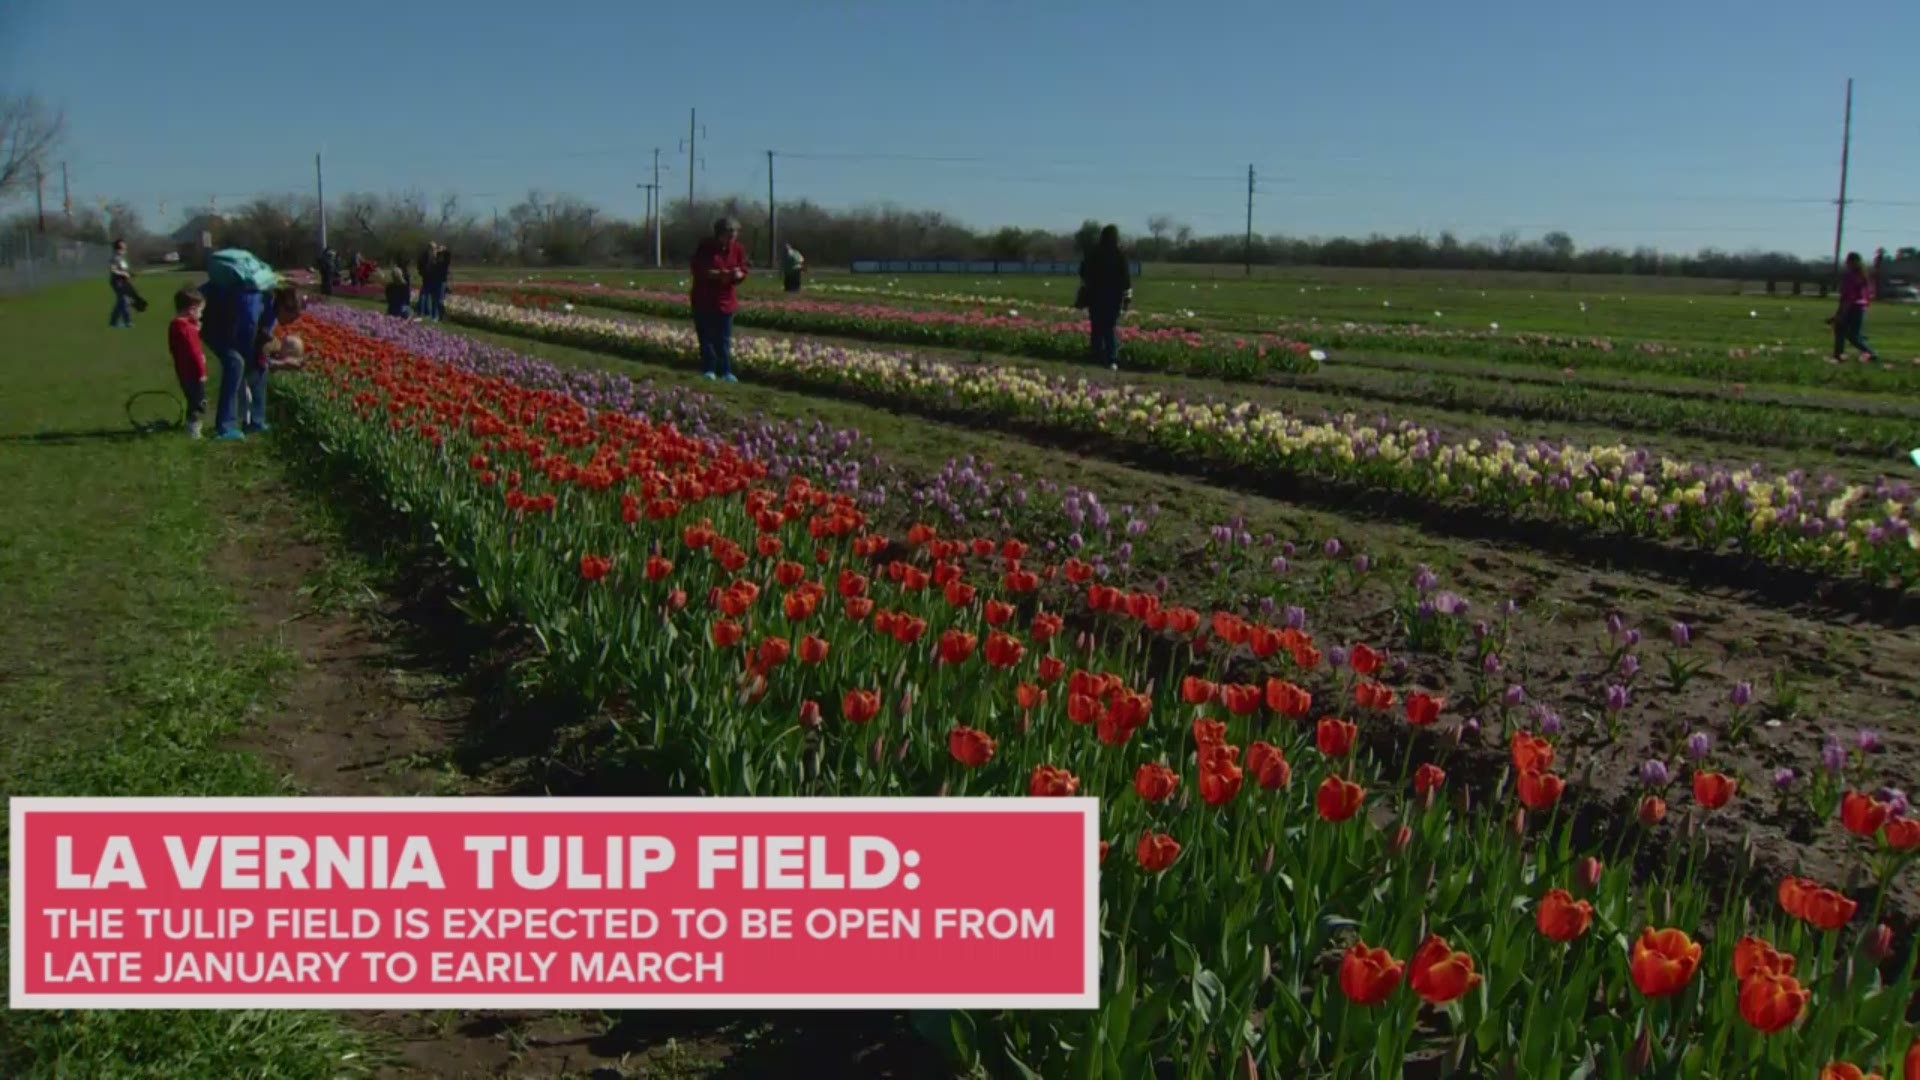 The dreamy San Antonio-area tulip field is now open and it dazzling. Guest can walk up and down rows of colorful tulips and even have a chance to pick their own.